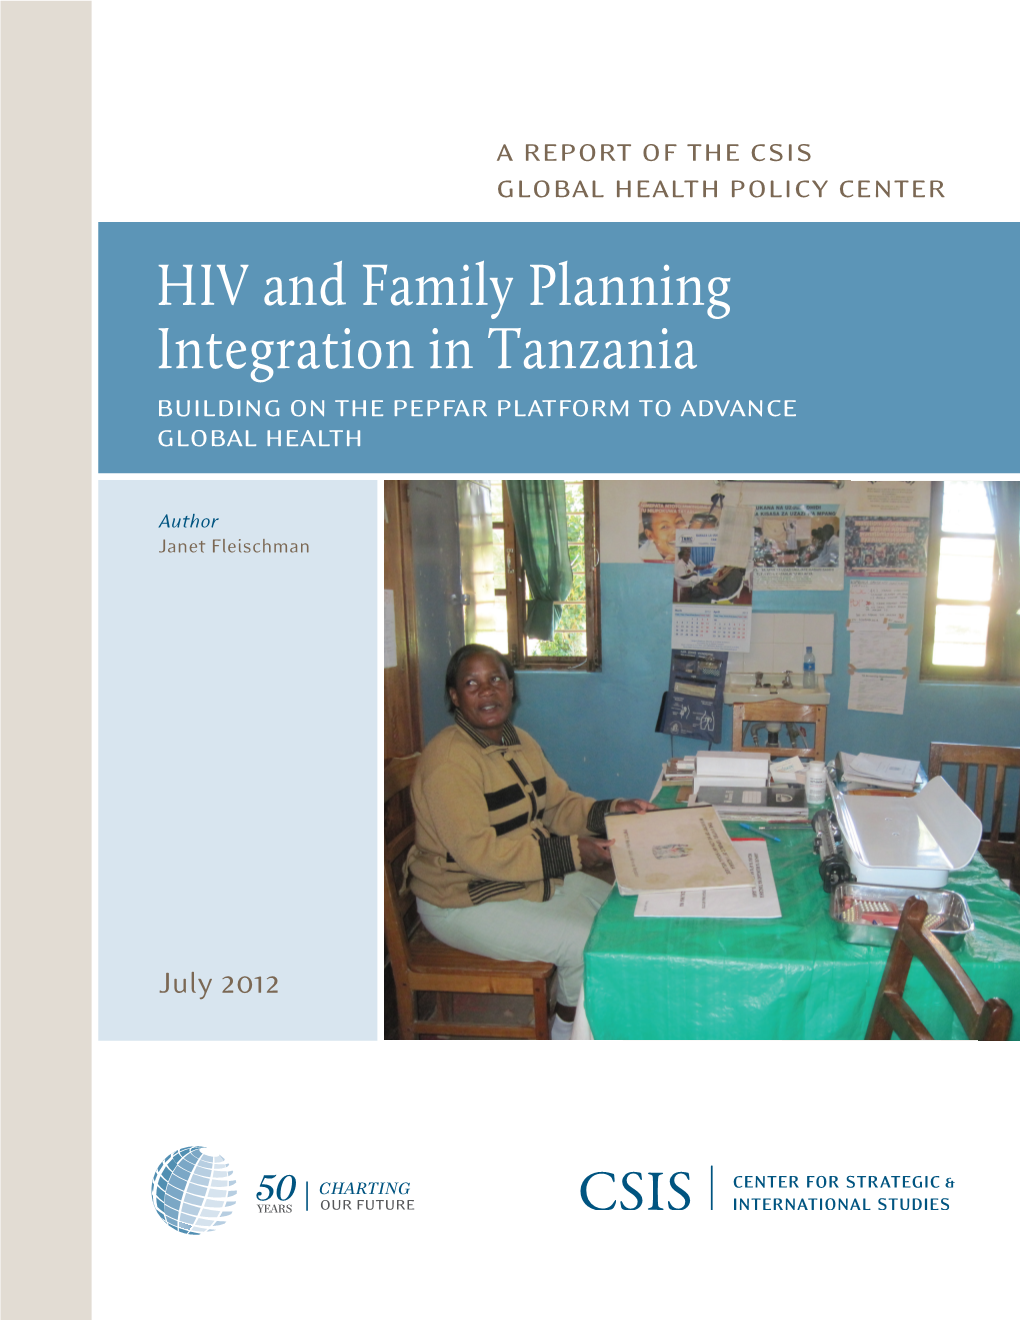 HIV and Family Planning Integration in Tanzania Building on the Pepfar Platform to Advance Global Health